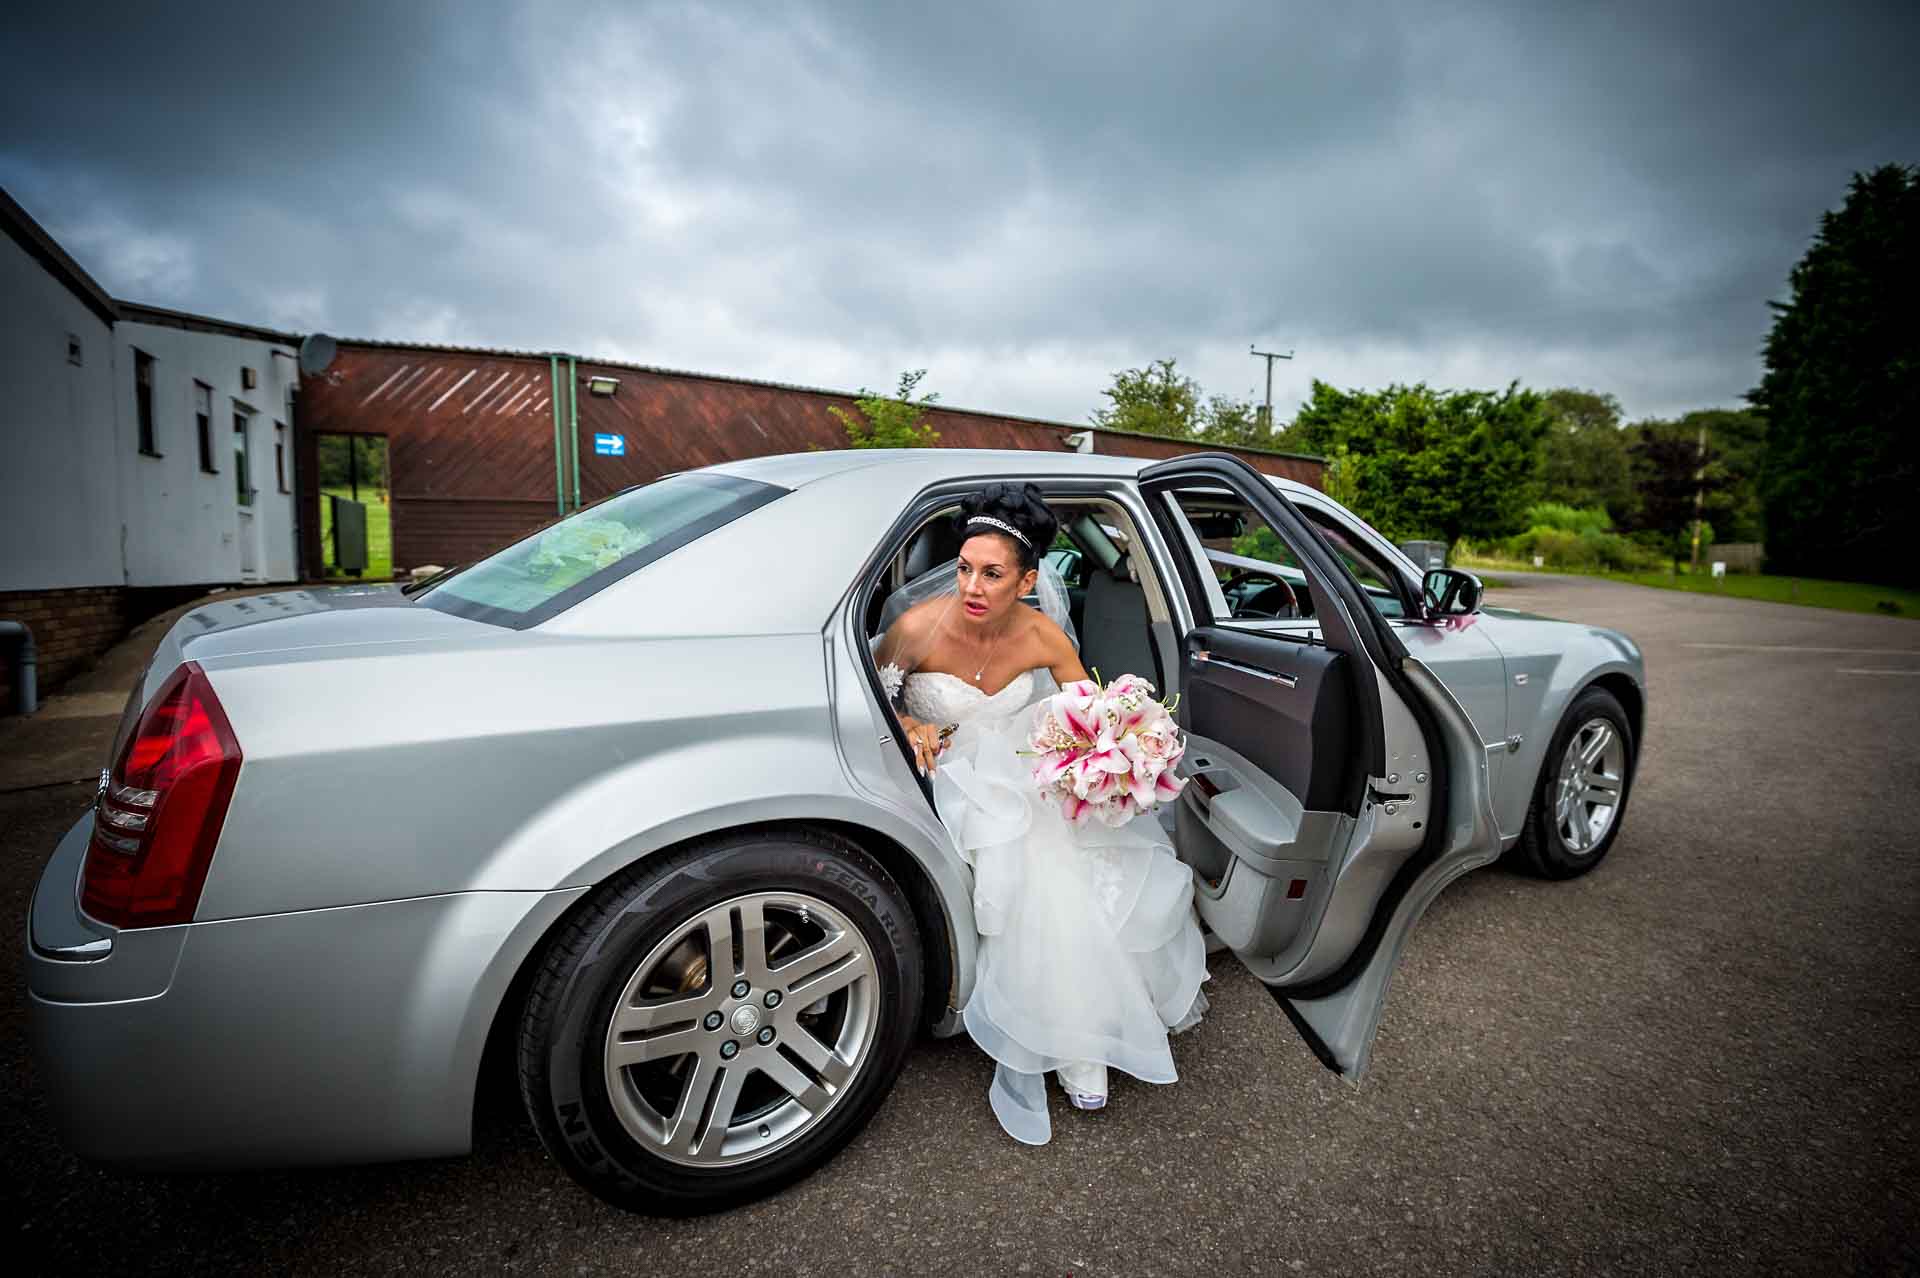 The bride arrives and gets out of a silver car at the Ridgeway Golf Club in Caerphilly